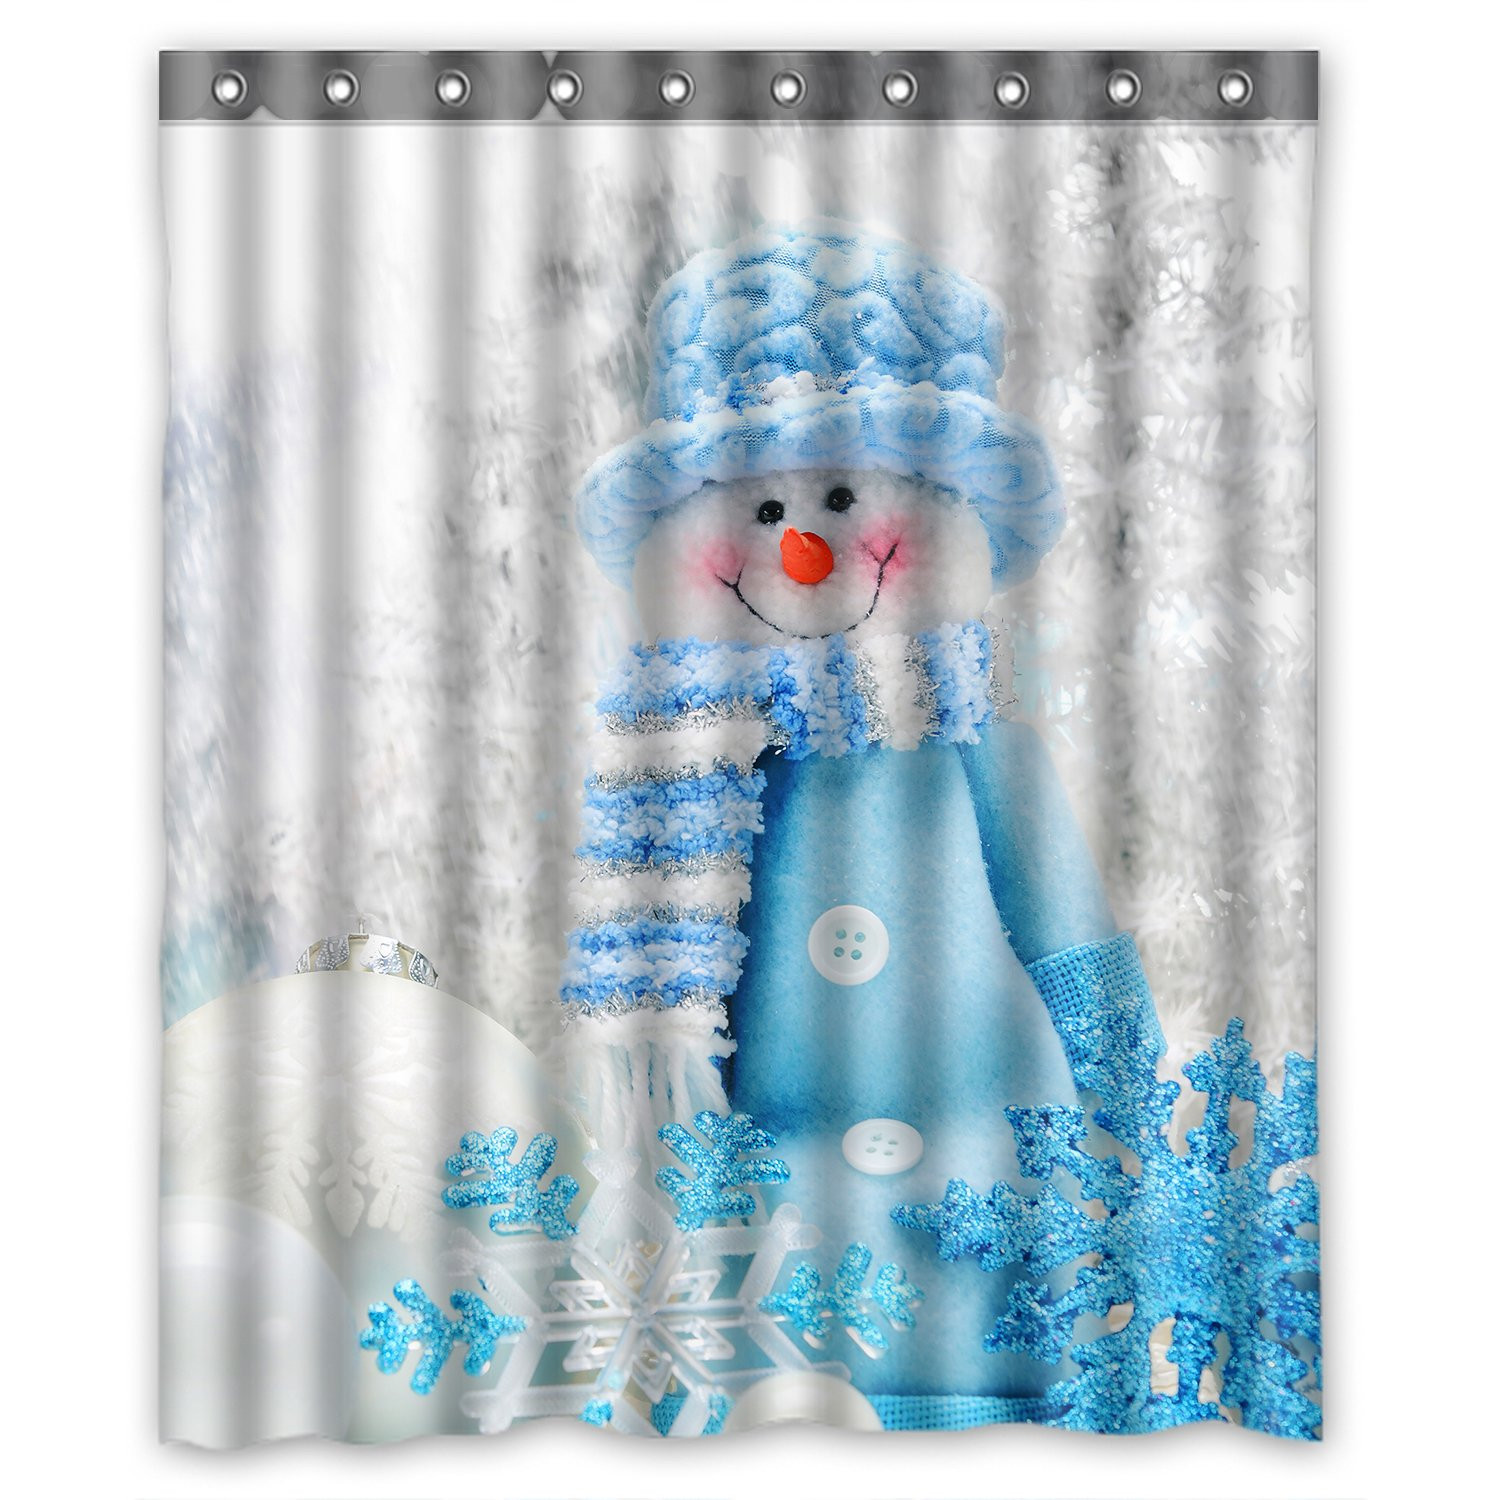 Snowman Bathroom Decor
 Snowman Bathroom Decorations and Accessories